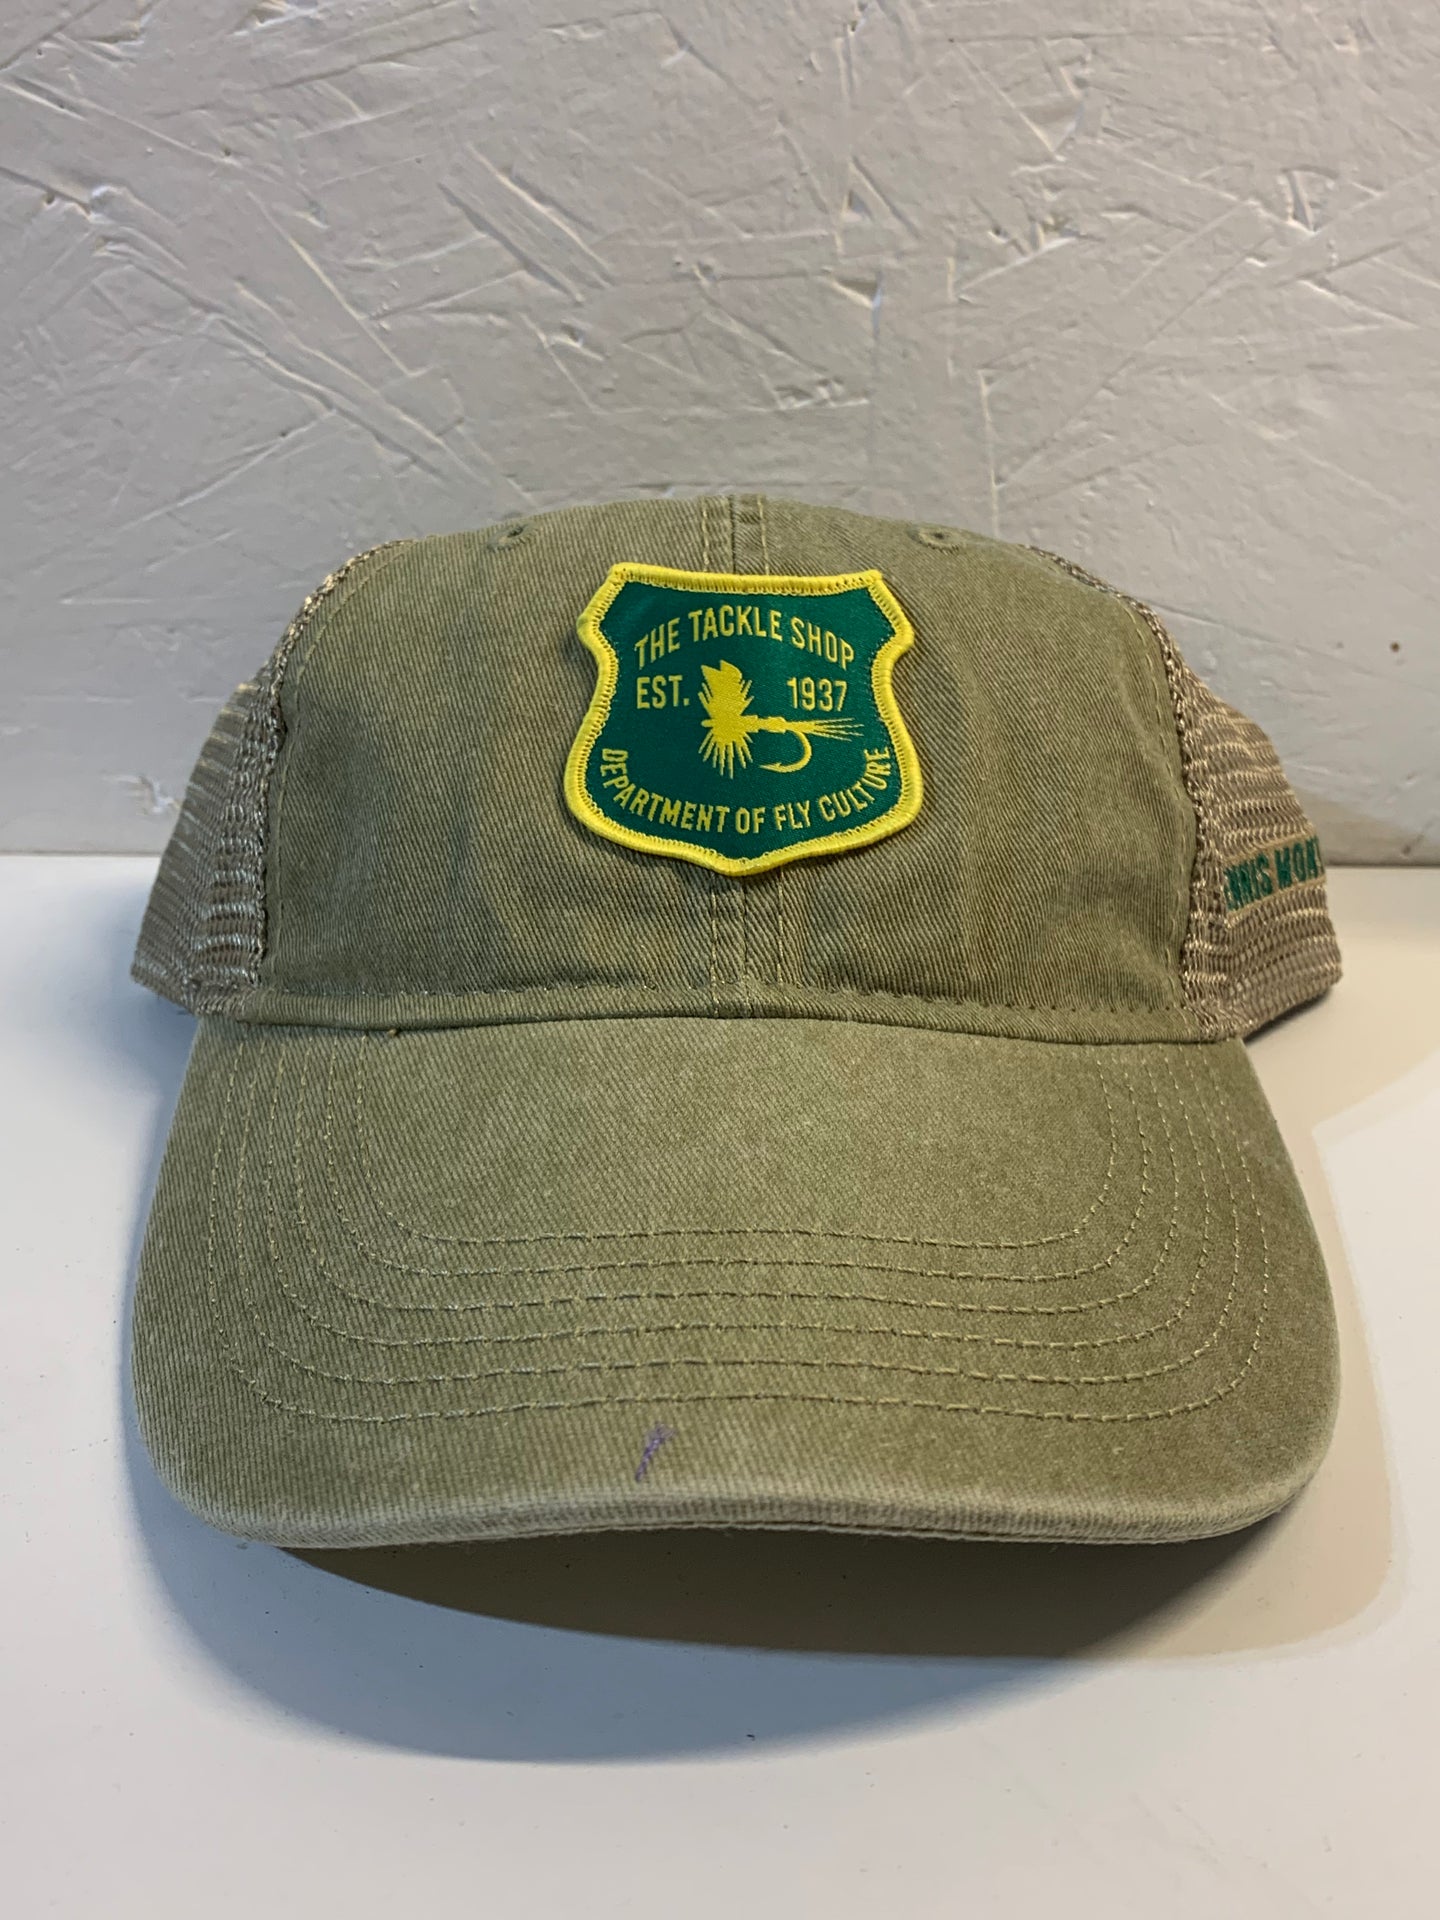 Ouray Department of Fly Culture Lengend Vintage Wash Trucker Cap